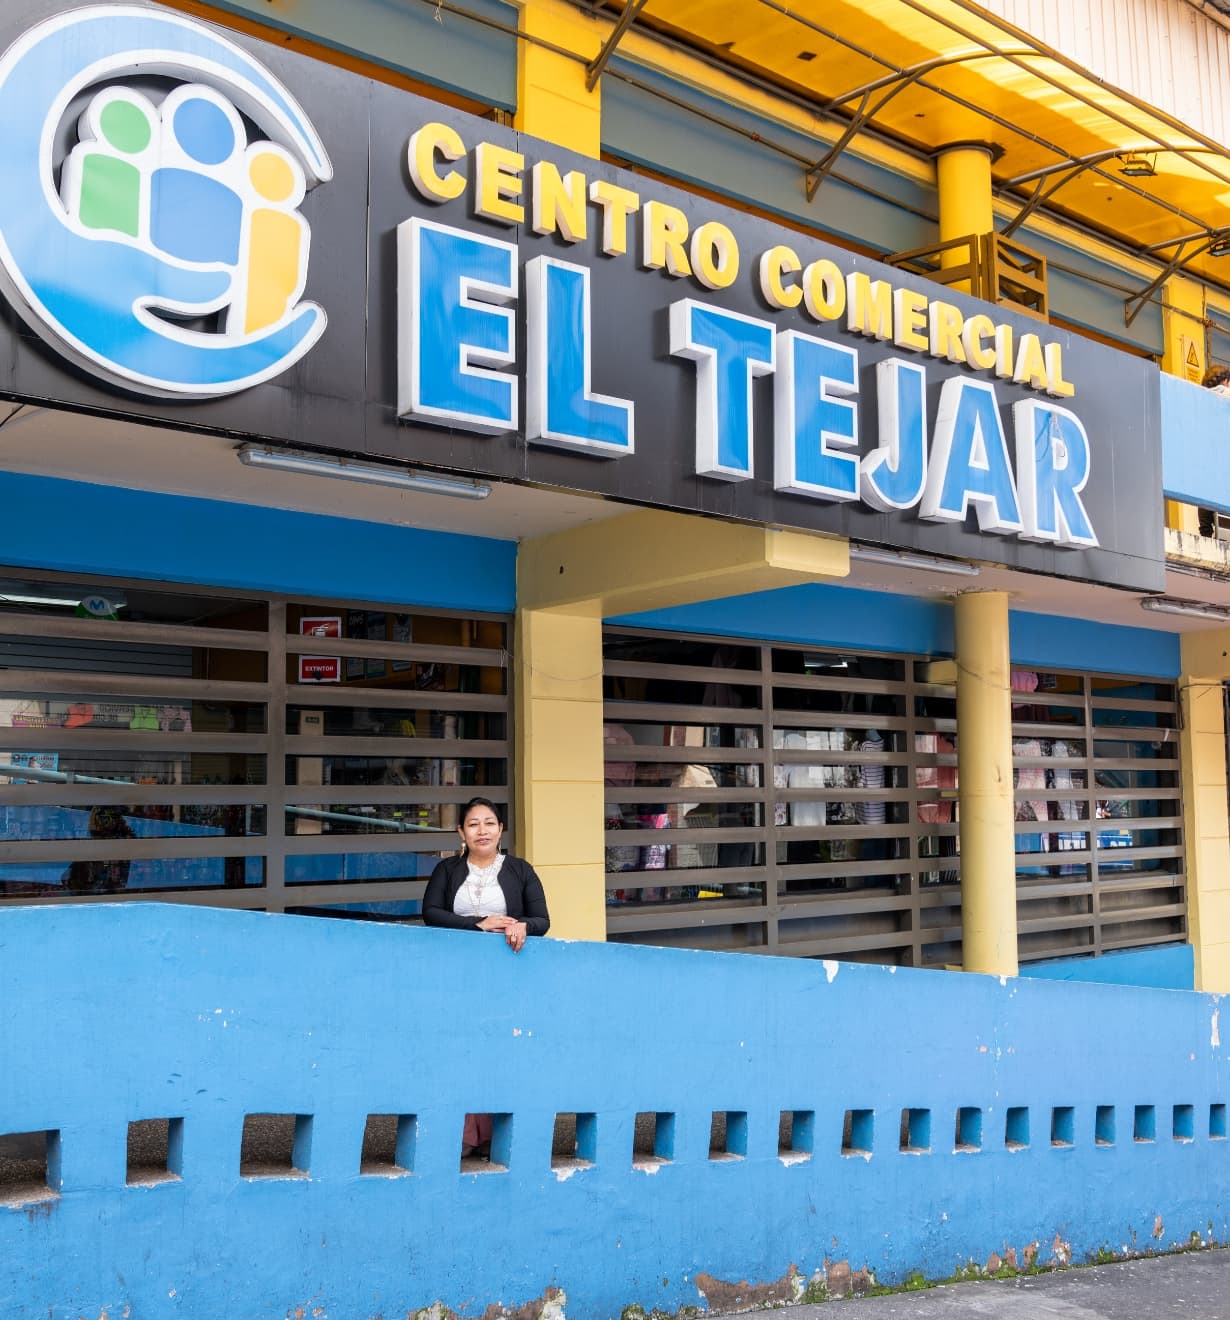 Nelly outside the Centro Comercial El Tejar, where her store is located